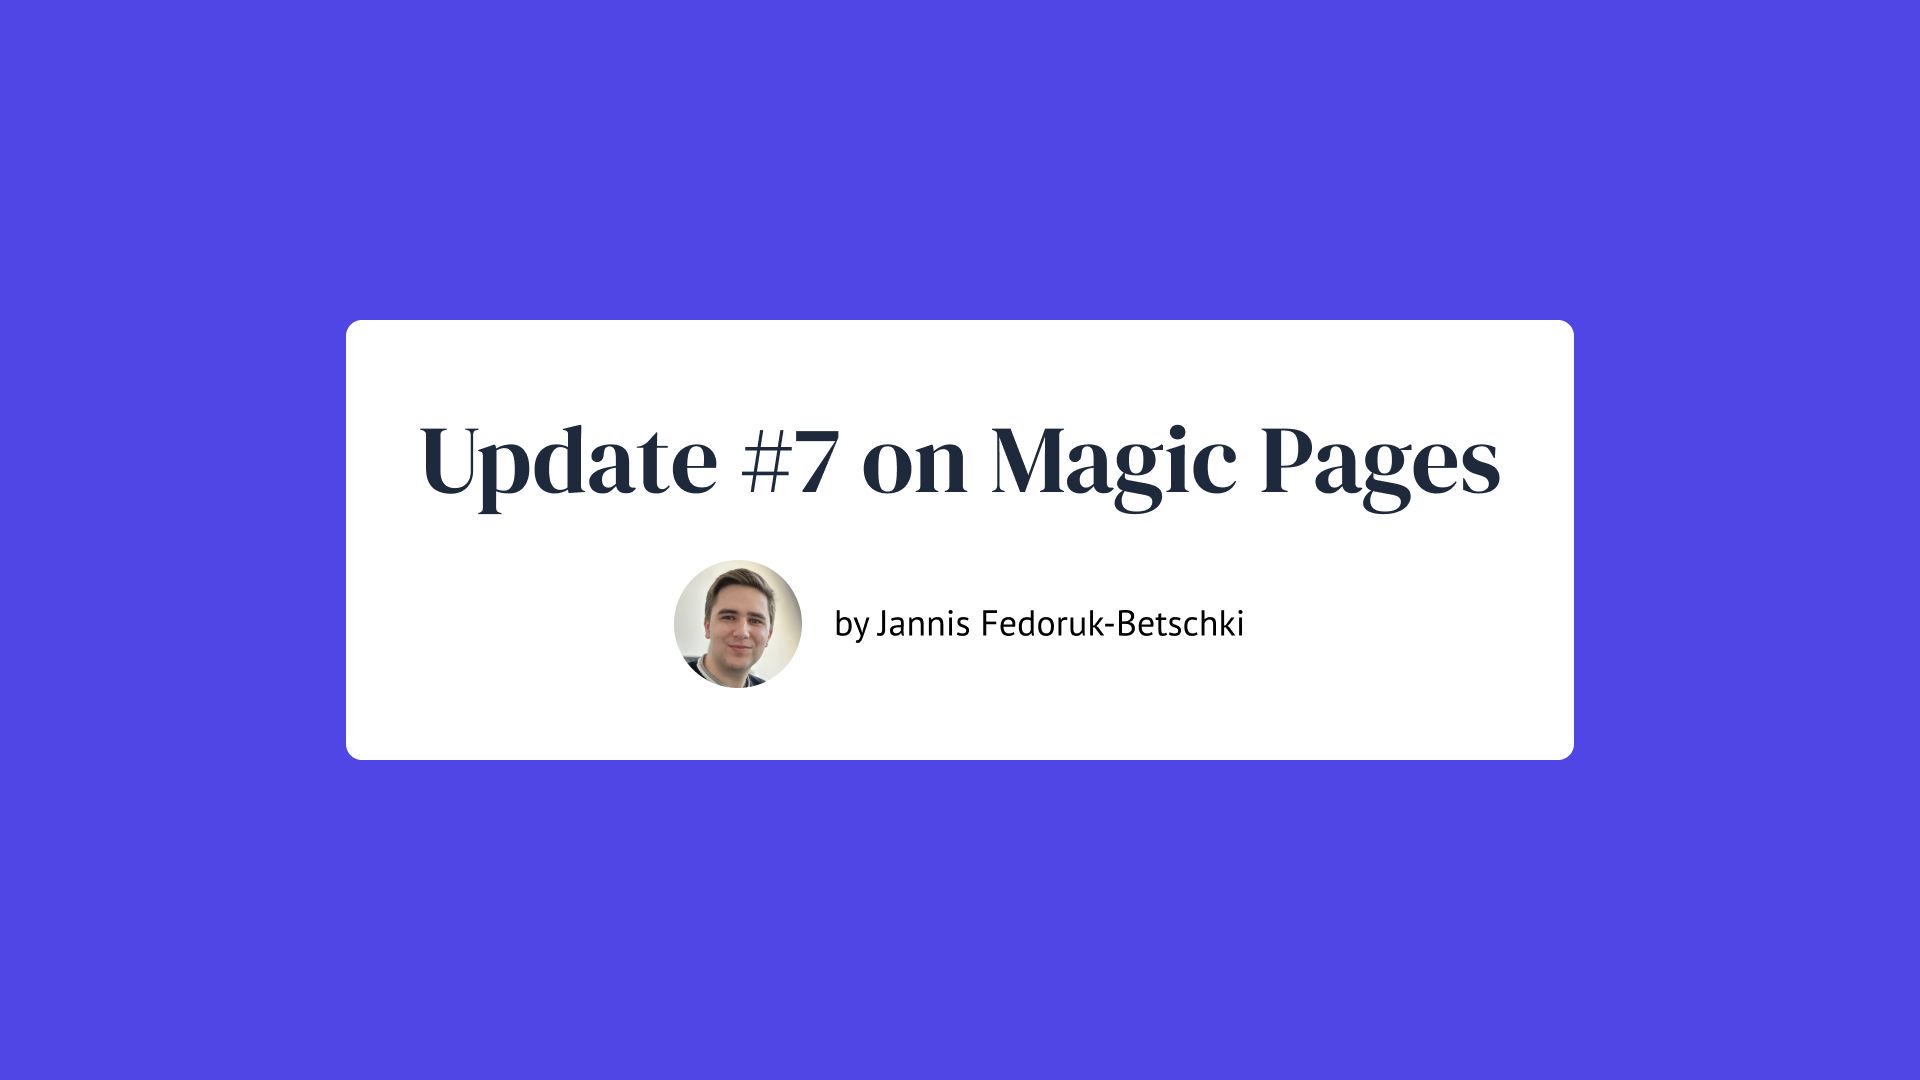 Update #7 on Magic Pages by Jannis Fedoruk-Betschki